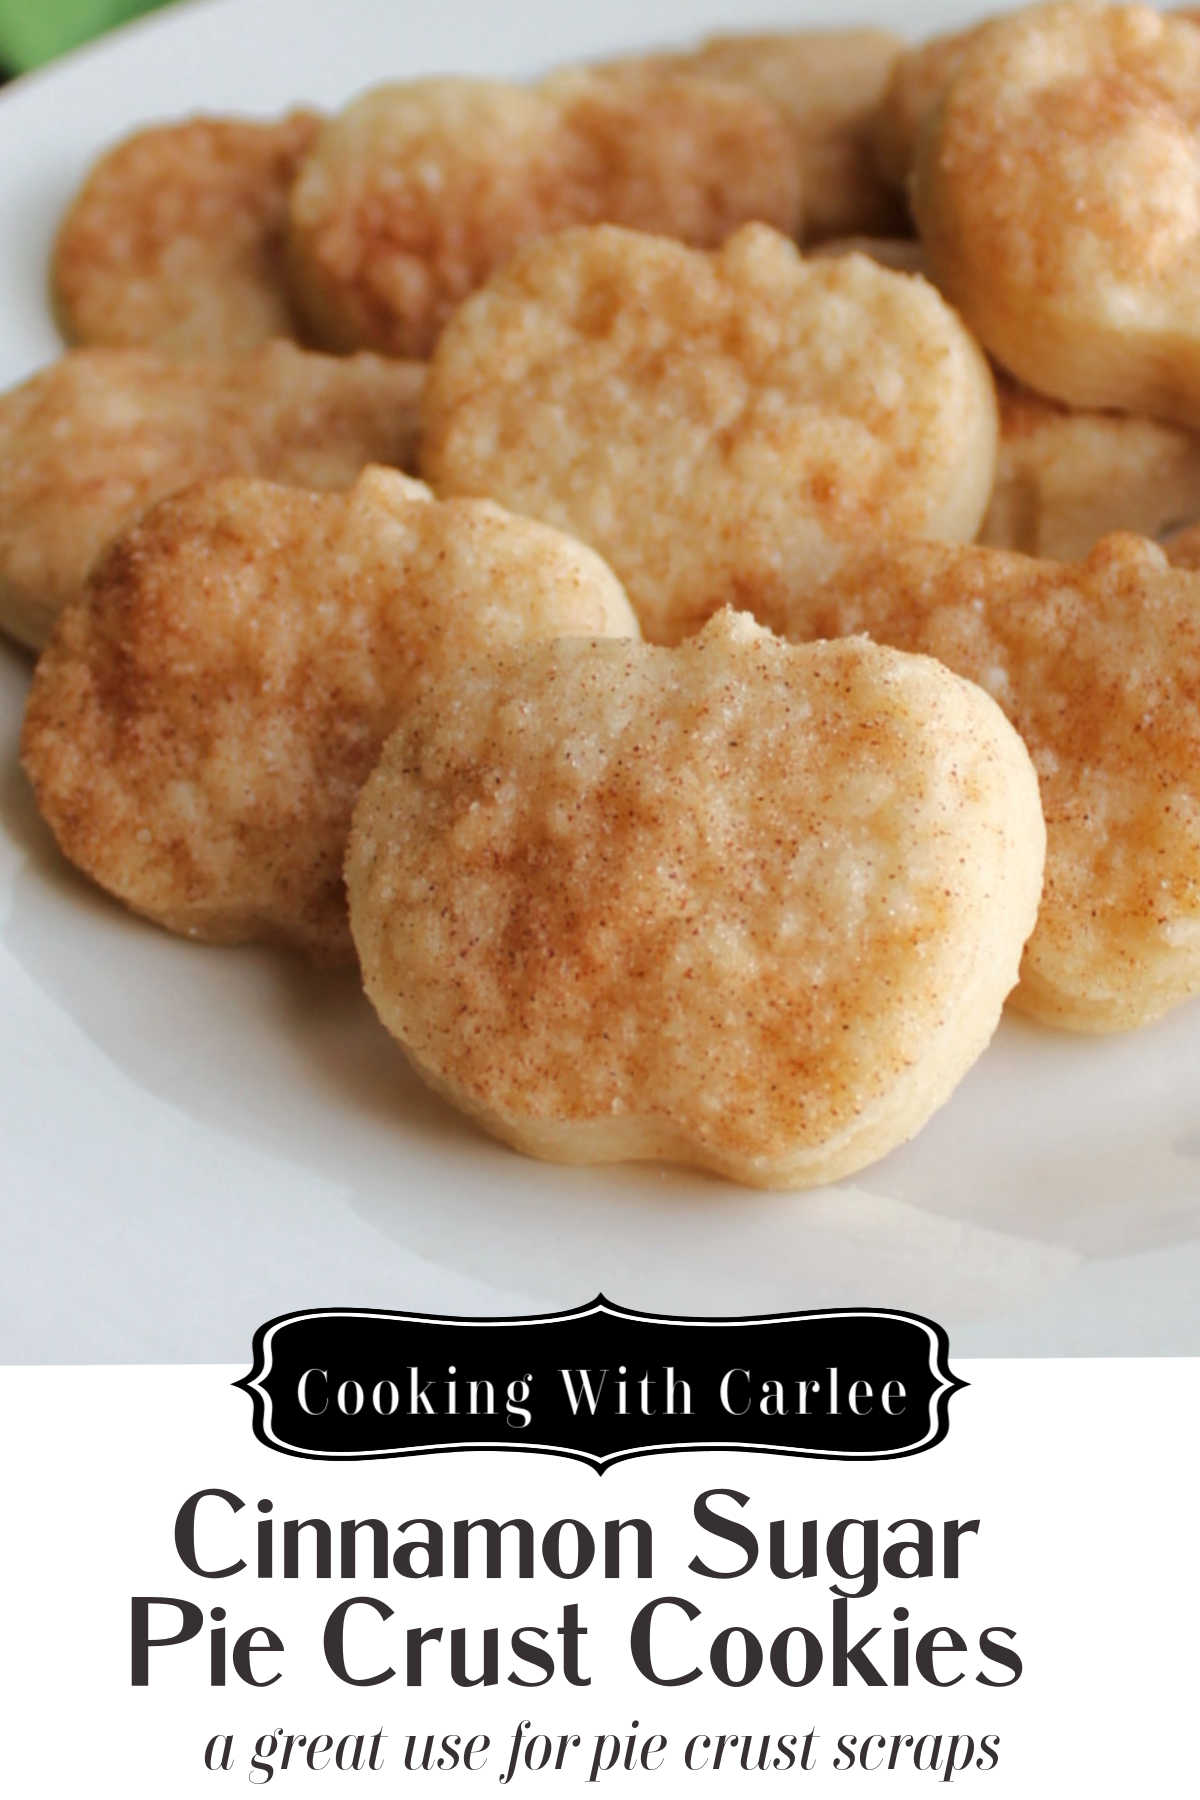 Turn scraps of pie crust into tender flaky cinnamon sugar cookies. They are a fun snack on their own, great dippers for sweet dips or make a pretty garnish for your pie.